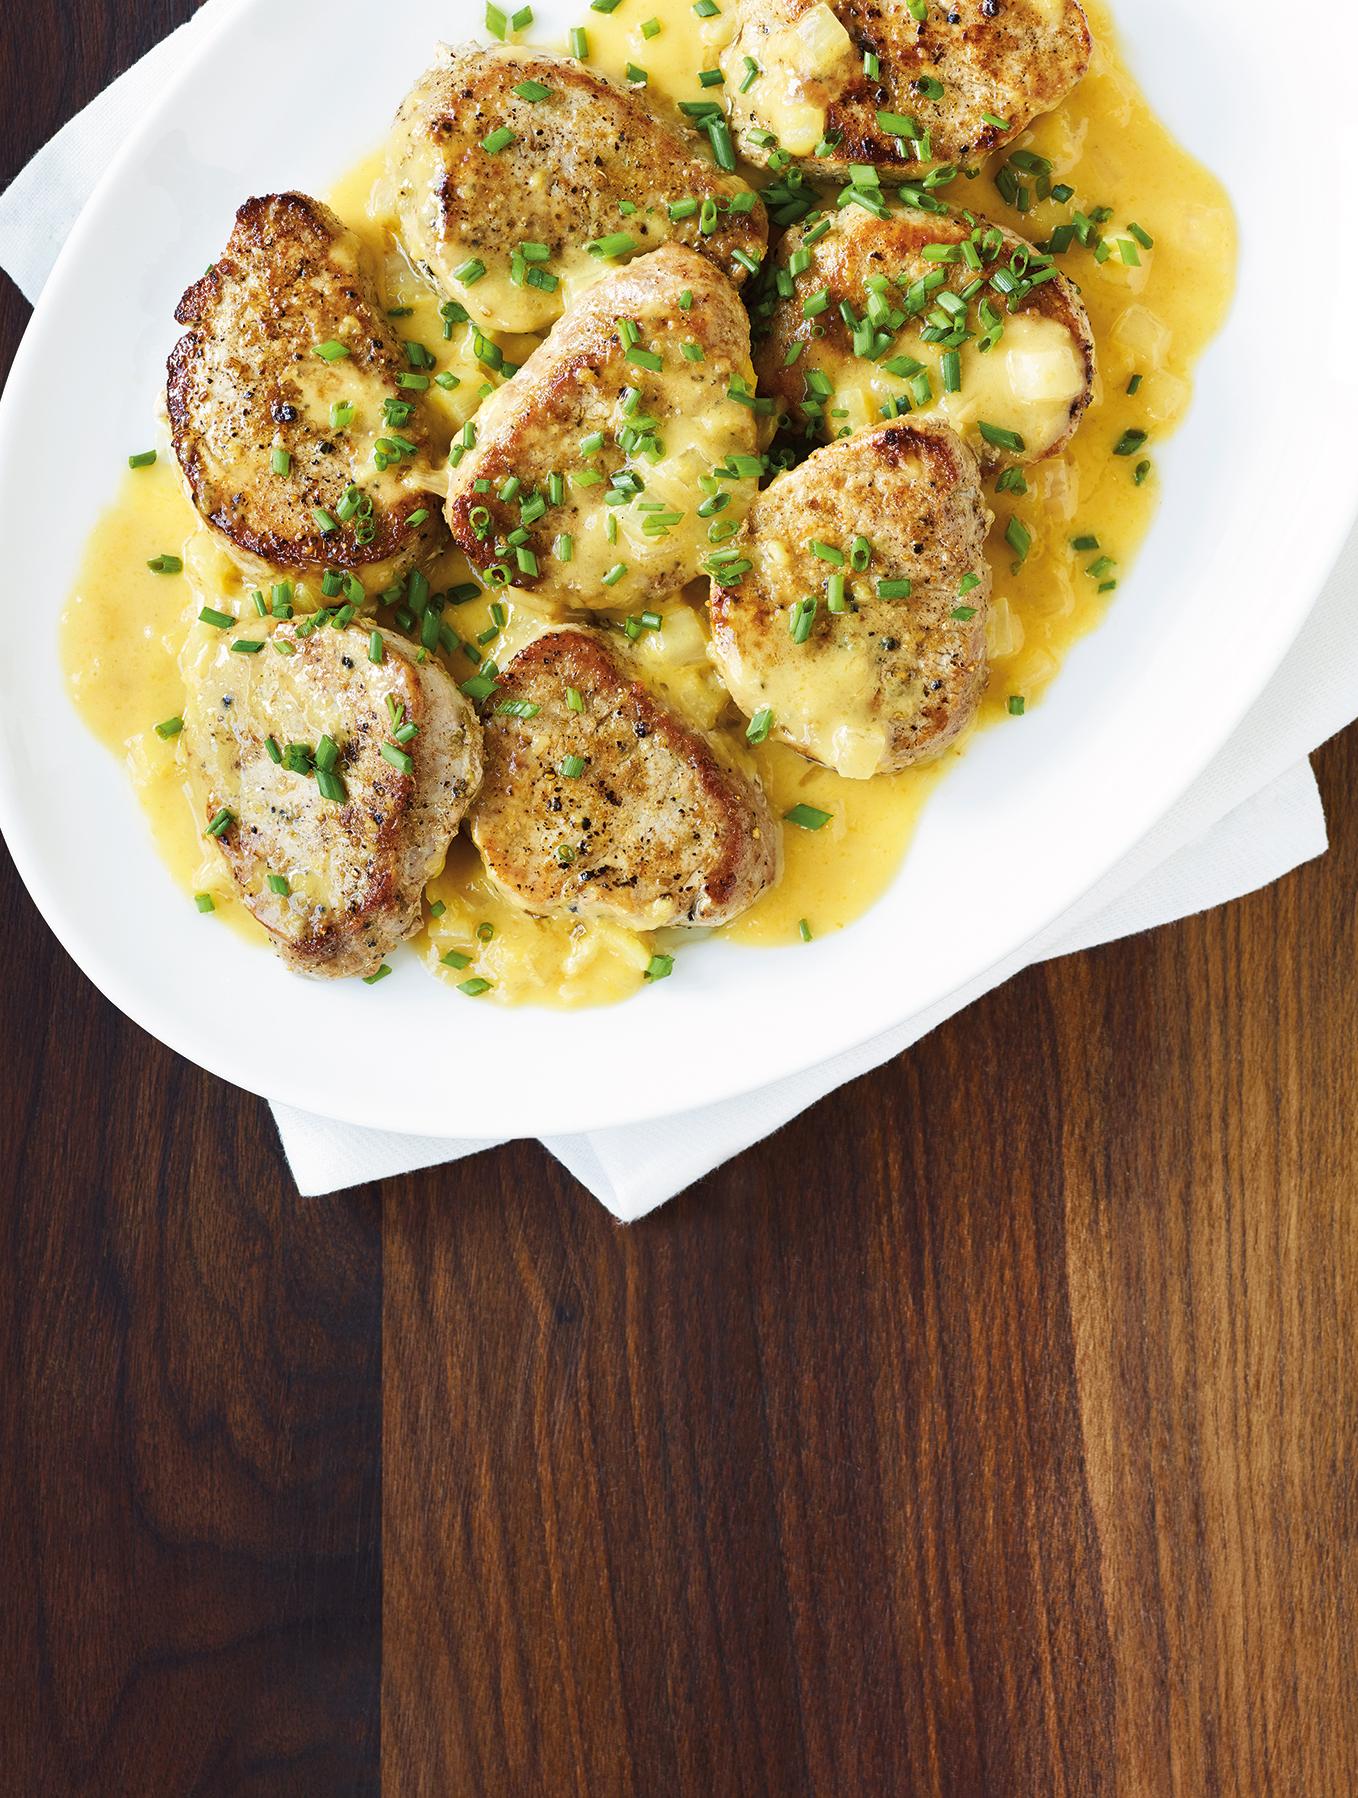 Medallions of Pork With Riesling Sauce